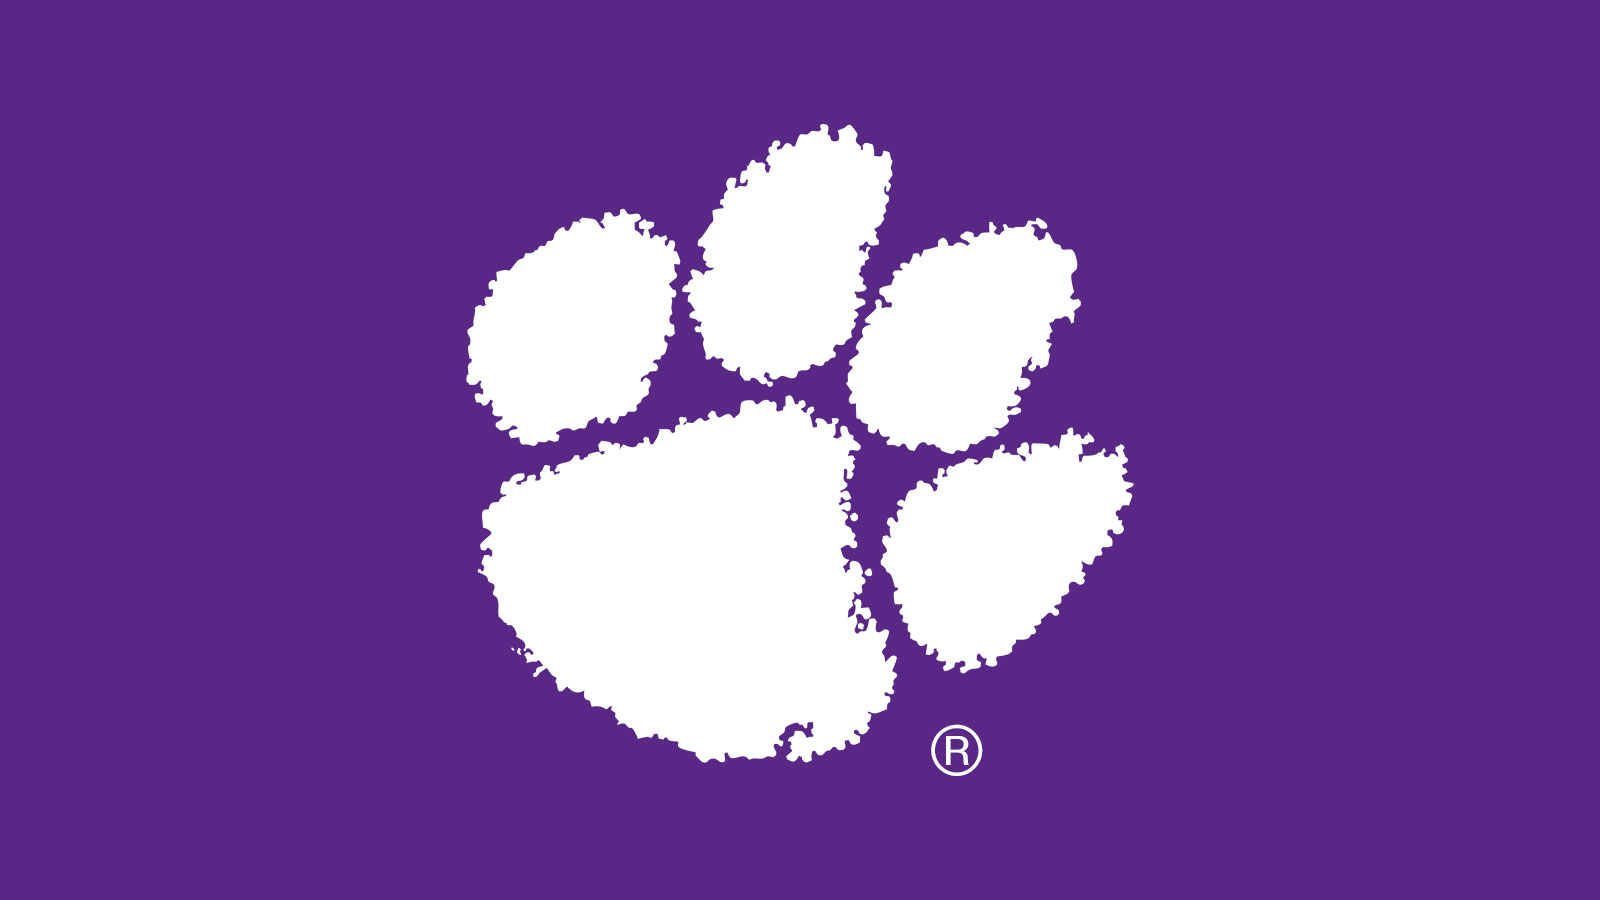 Clemson University partnering with South Carolina to fix rural internet issues